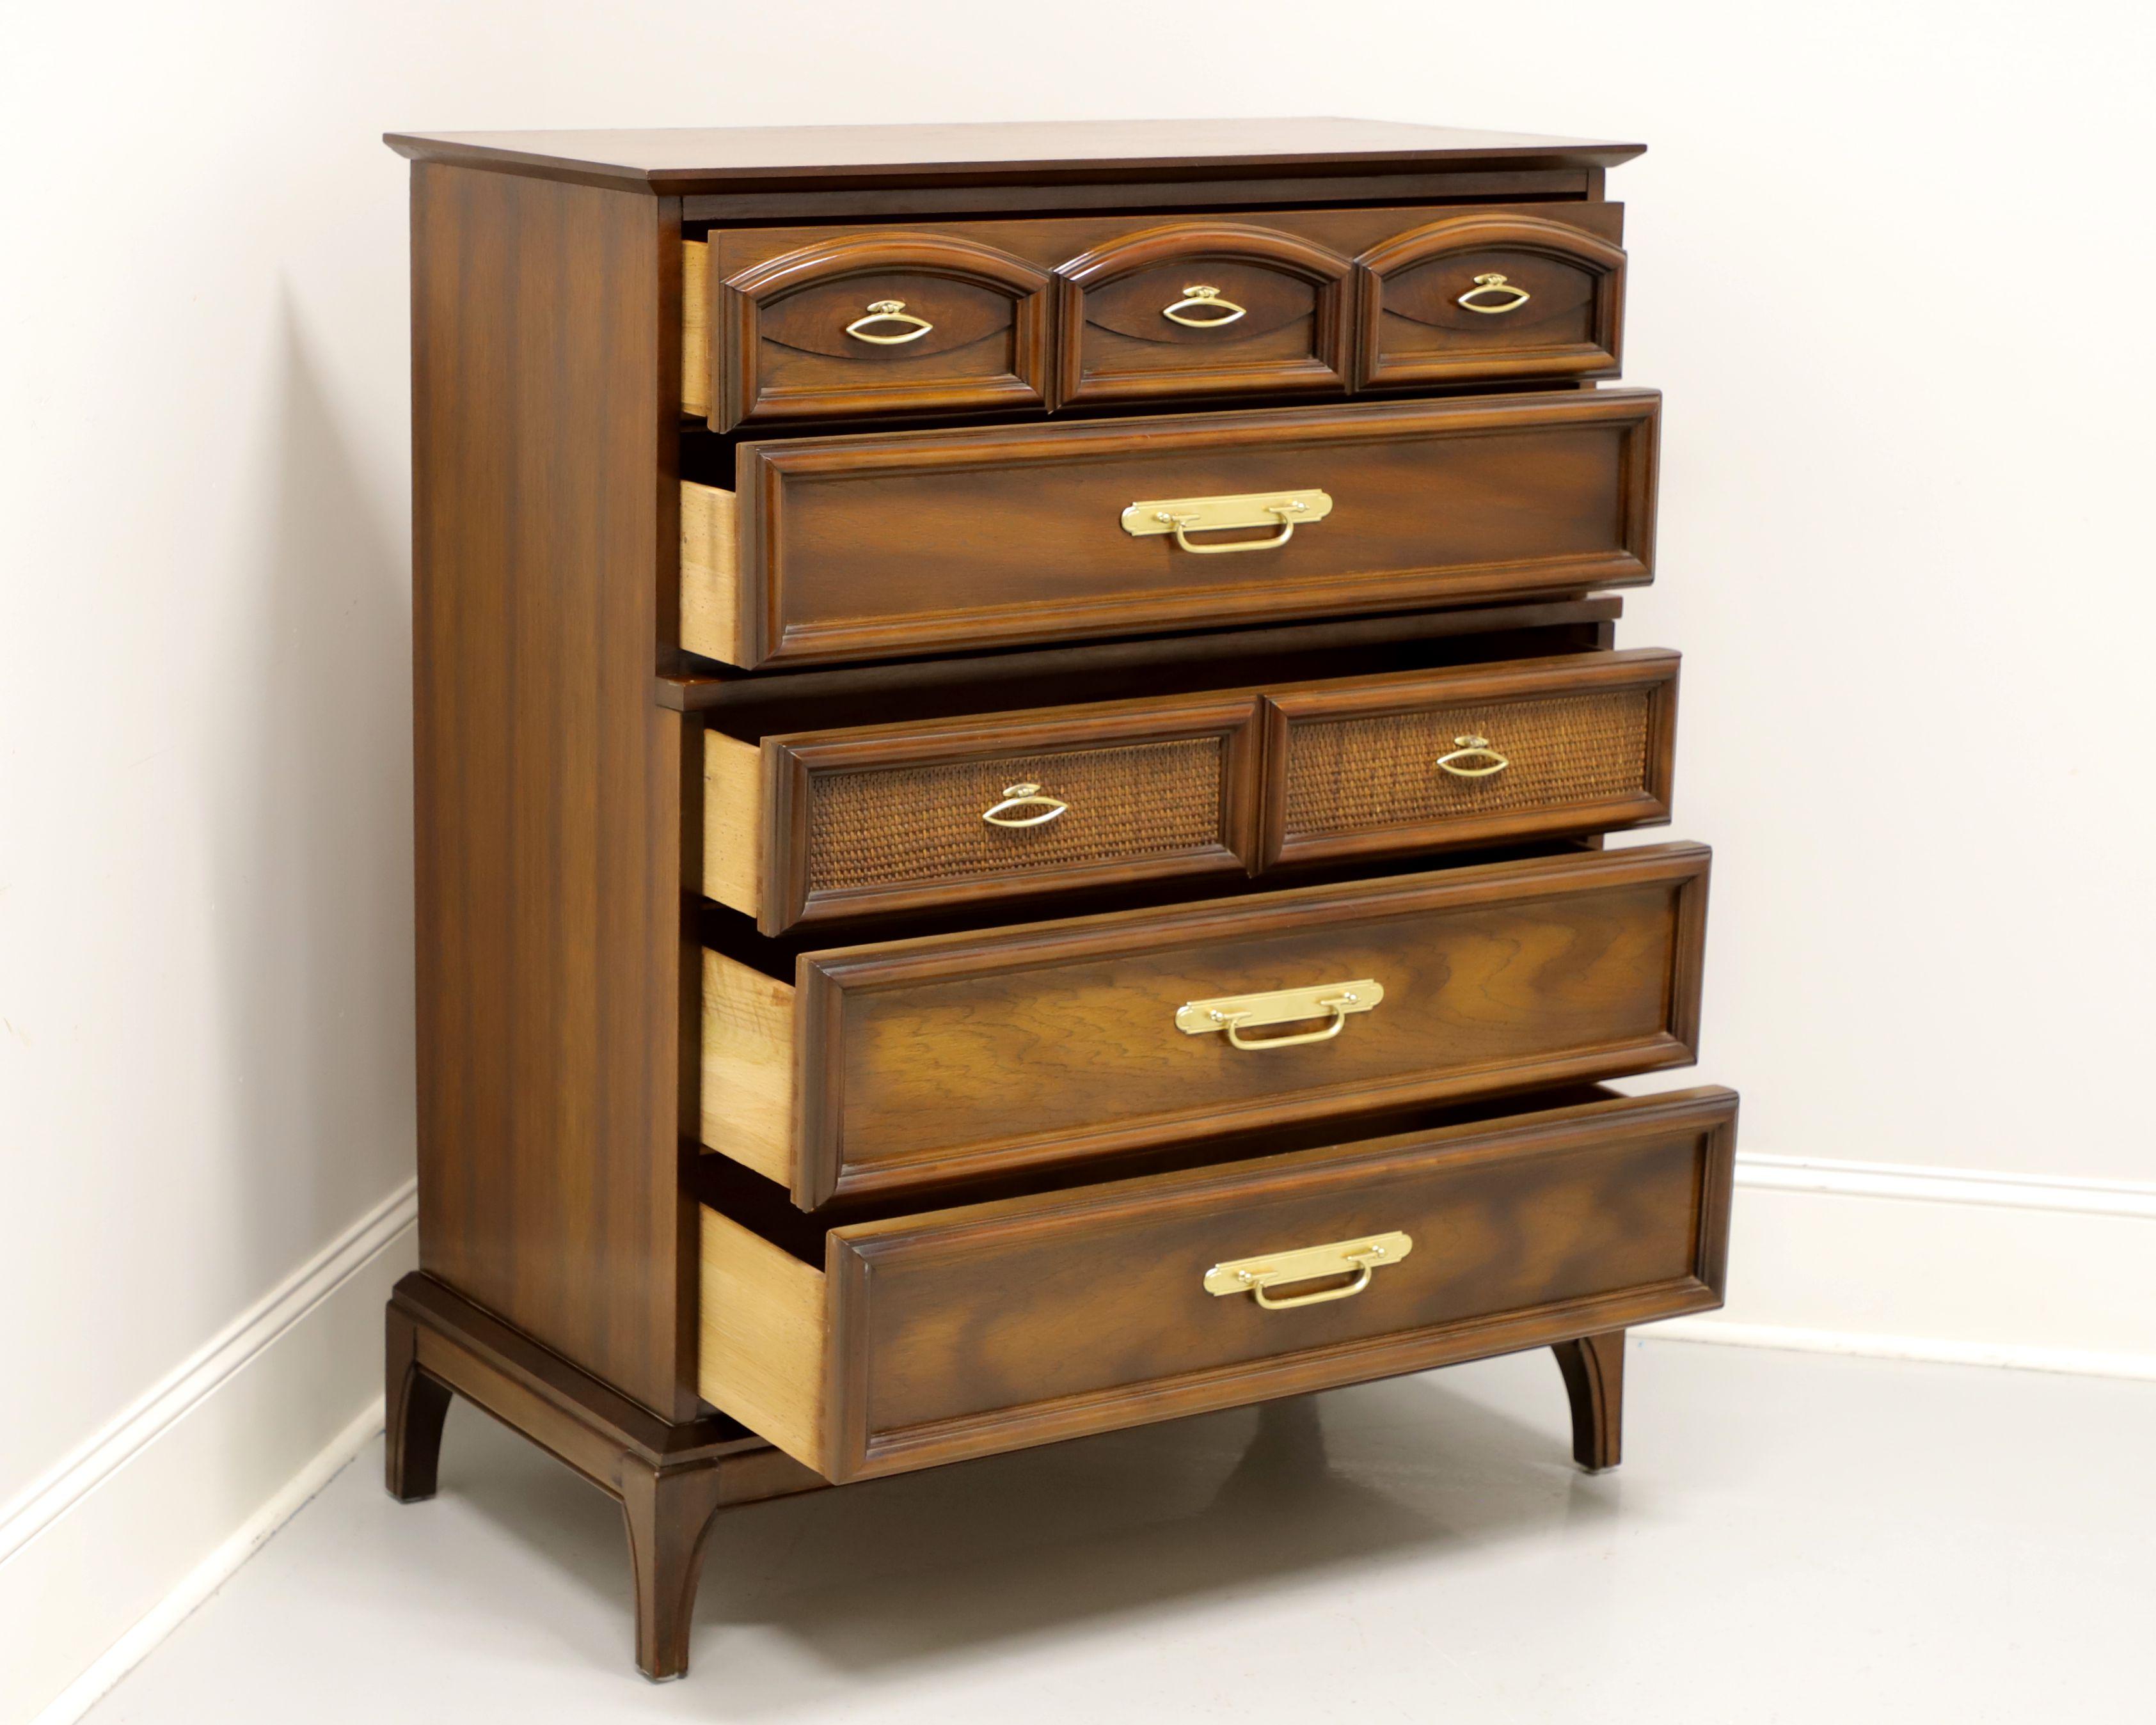 Mid 20th Century Walnut Asian Influenced Chest of Drawers In Good Condition For Sale In Charlotte, NC